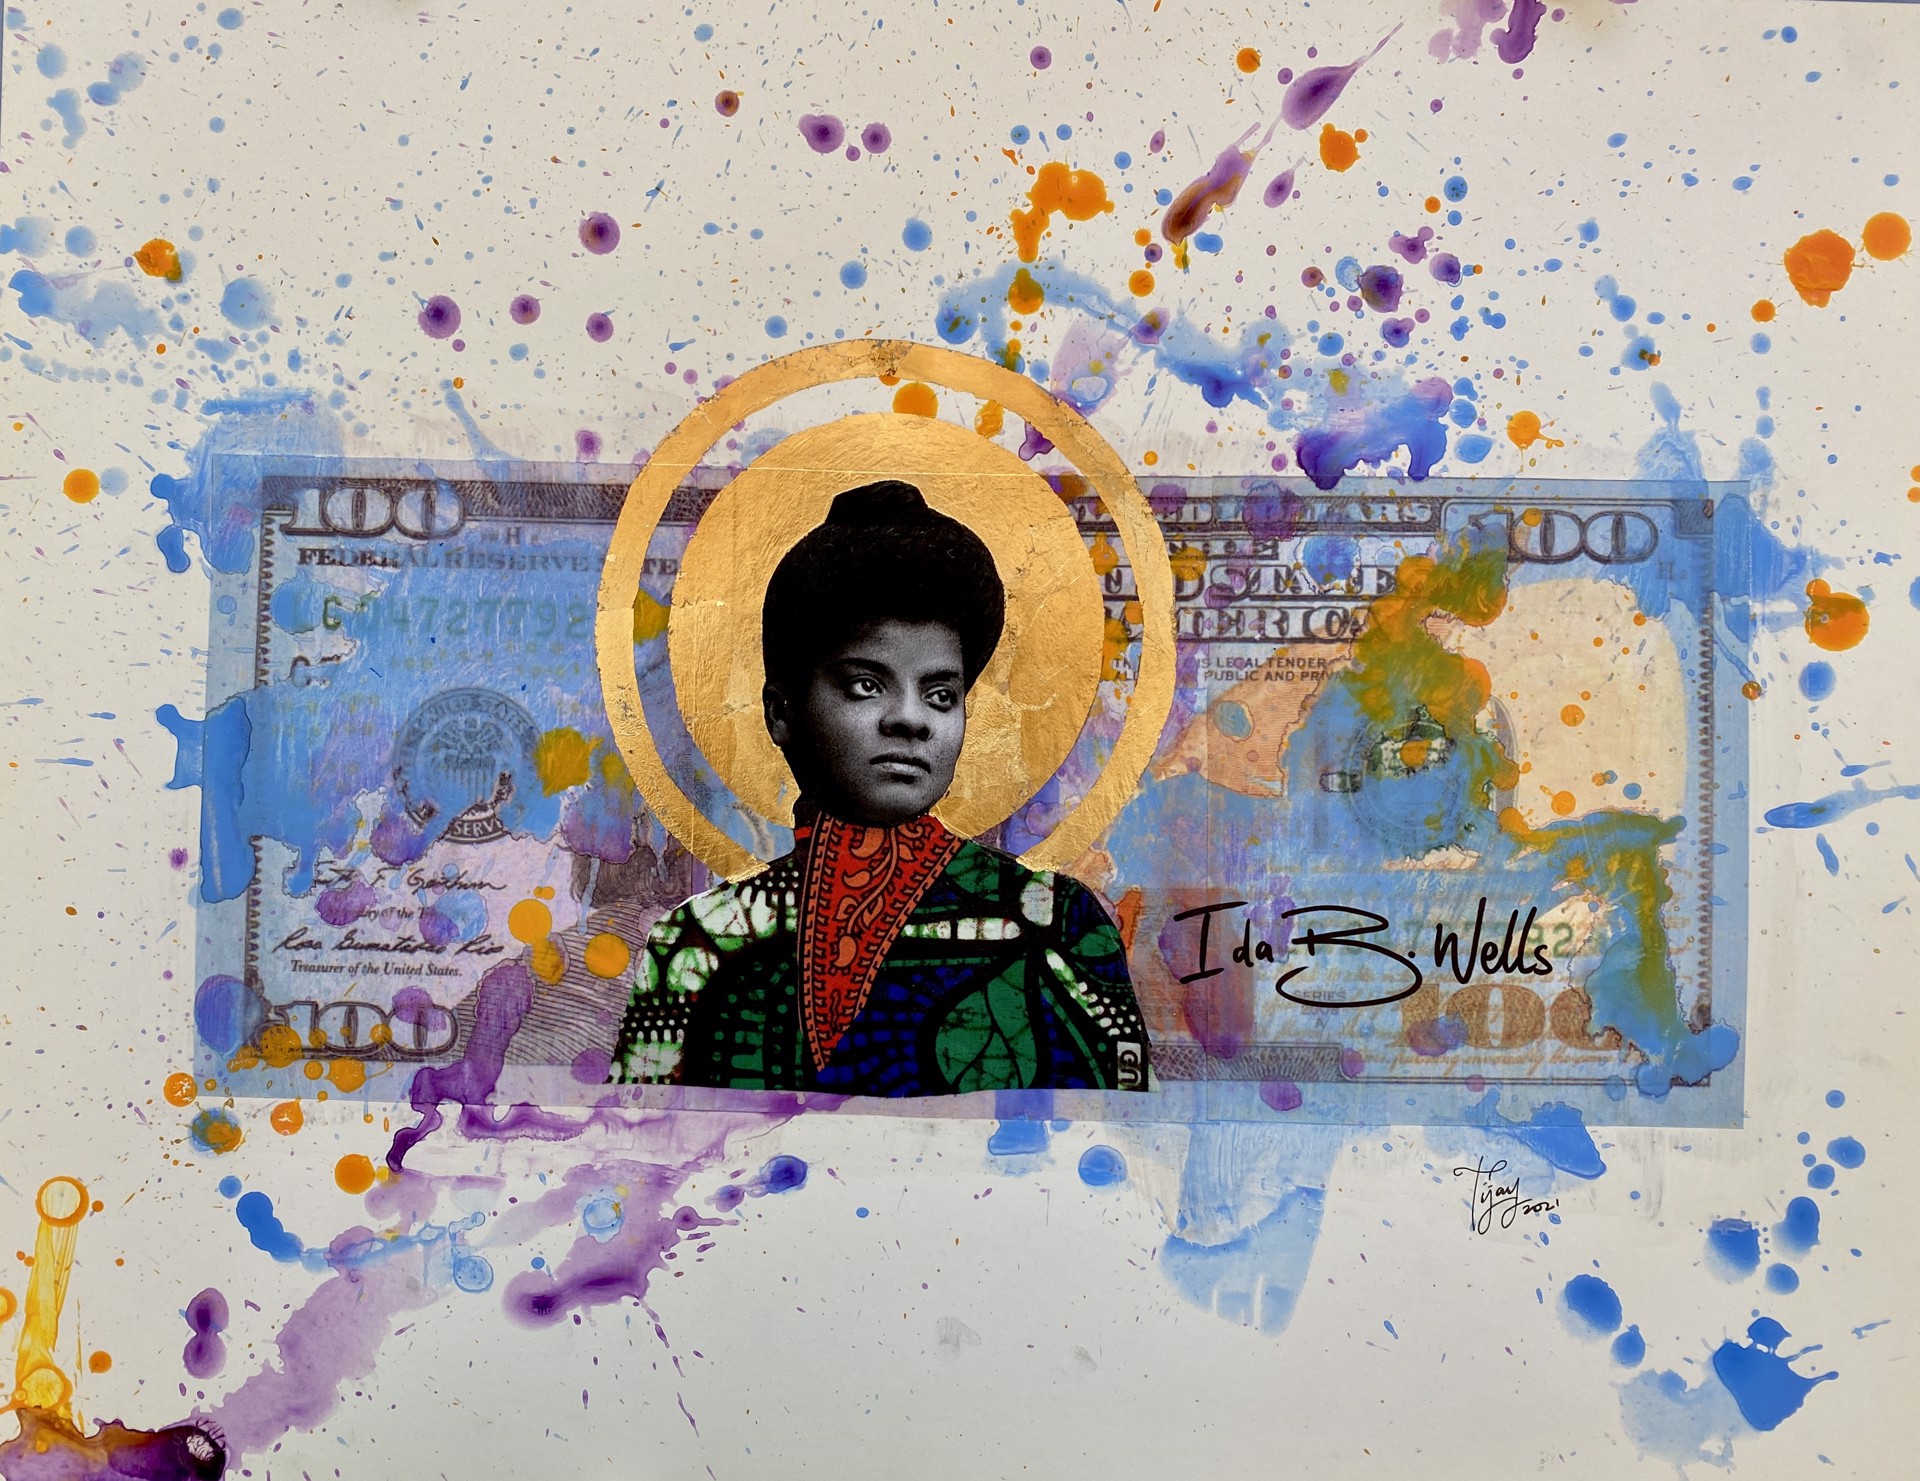 The Pride of Our Village, Ida B. Wells by Tijay Mohammed